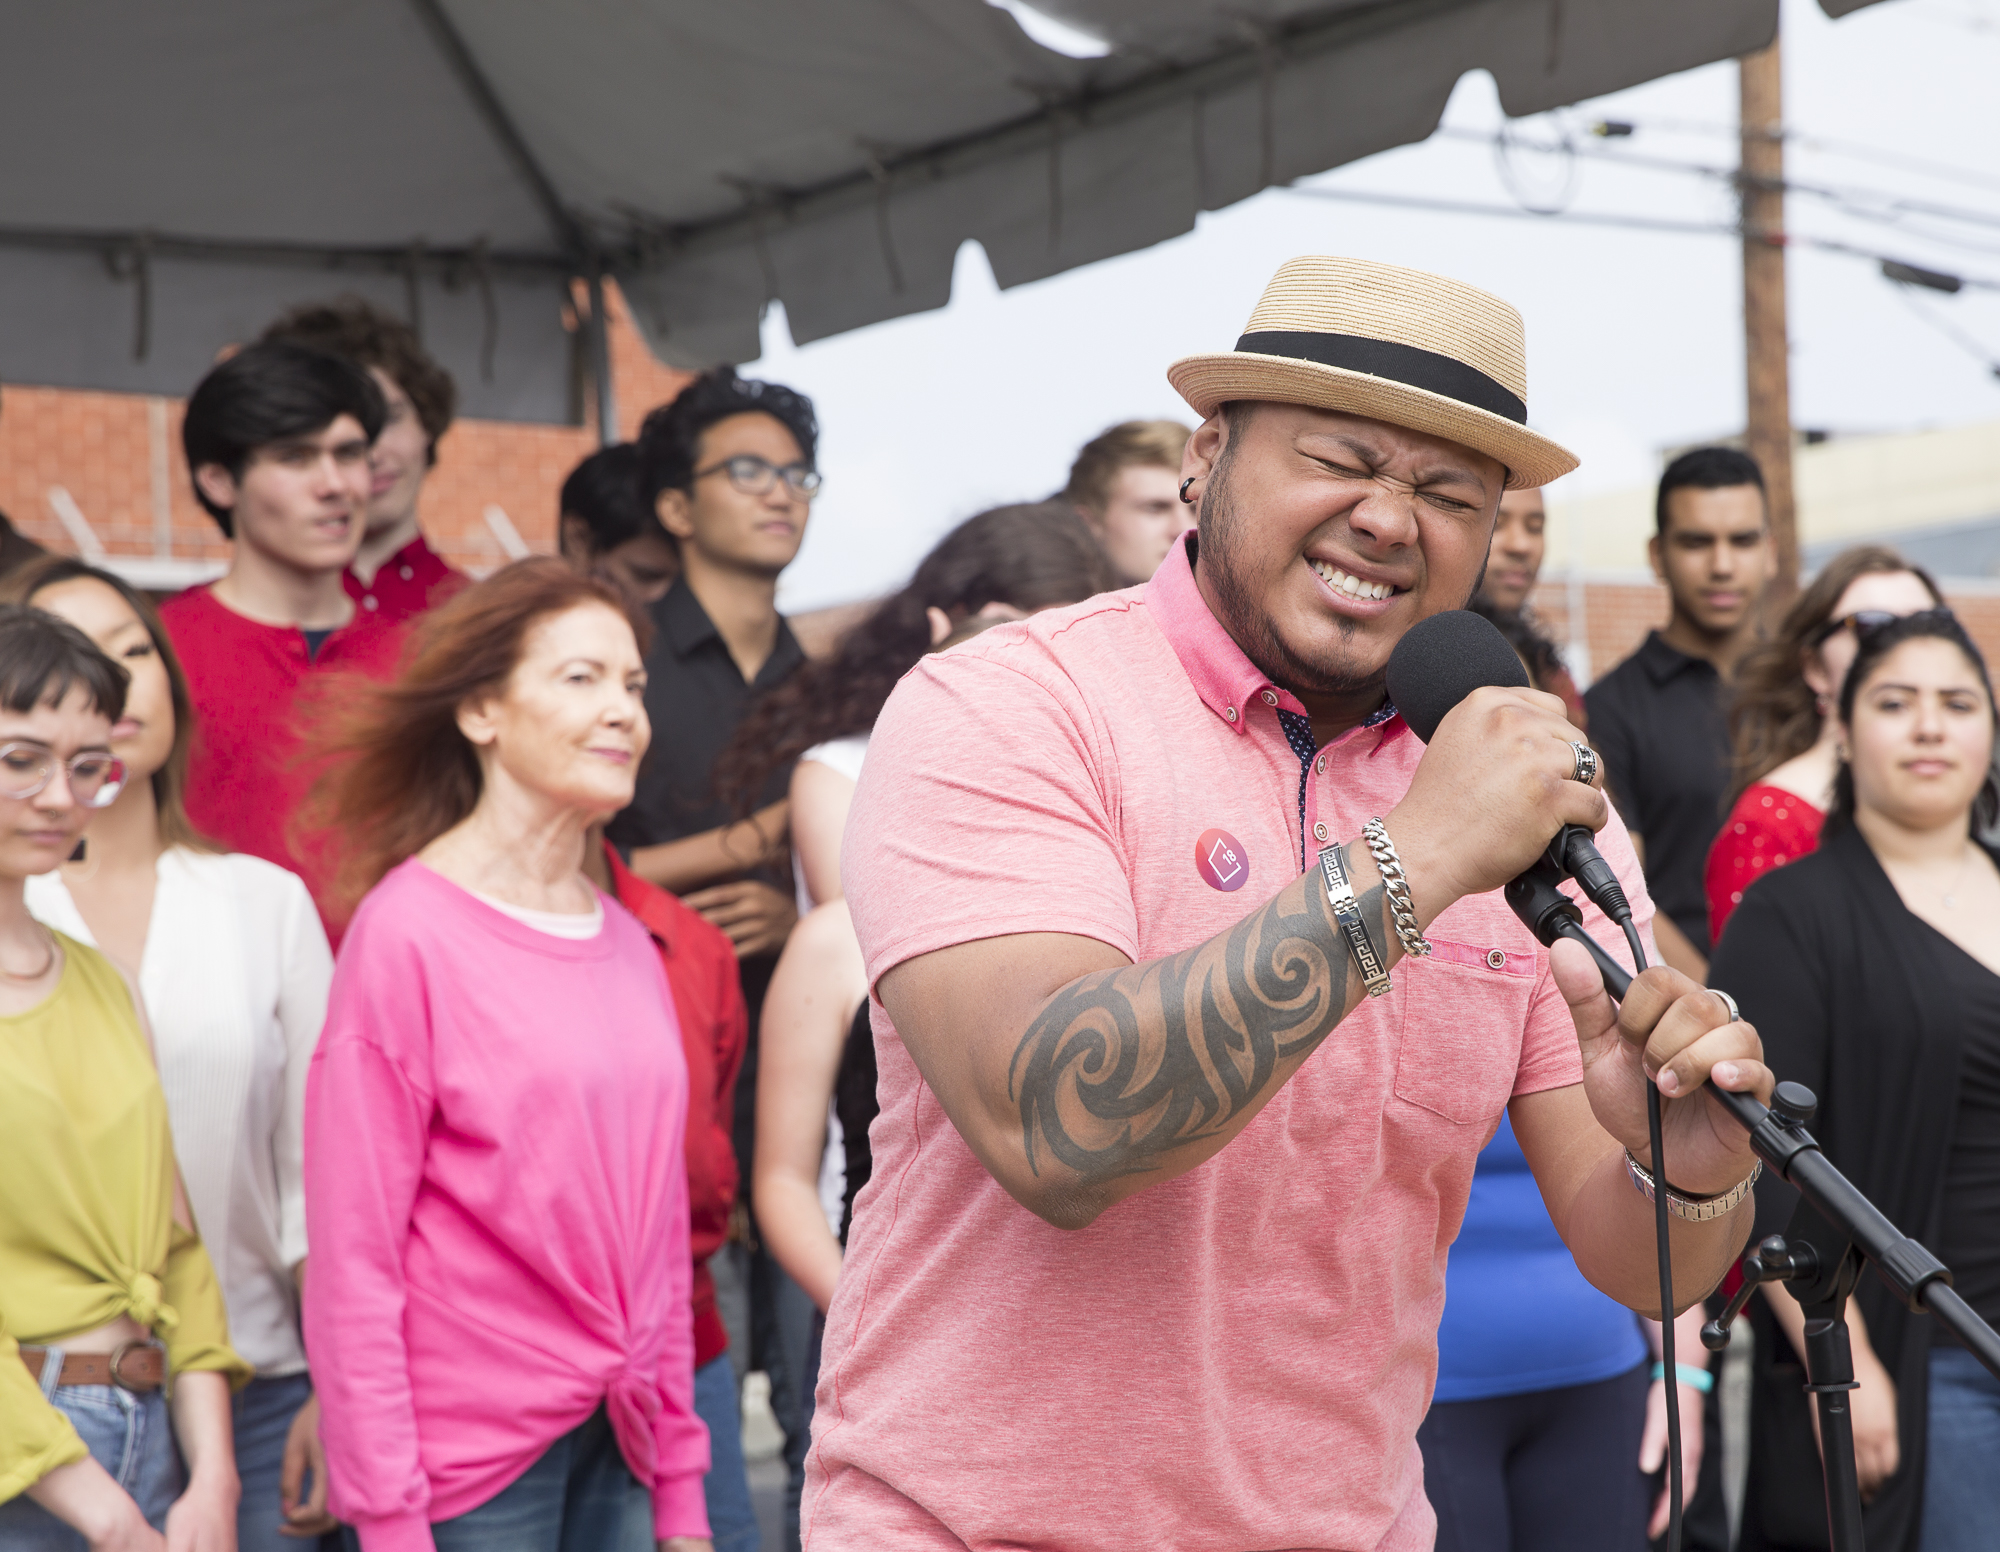  Santa Monica College (SMC) sophomore and member of the SMC Jazz Vocal Ensemble Andy Hernandez performs a classic song by Harry Connick Jr. track during the Pico Block Party festivities that took place at the 18th street Arts Center in Santa Monica, 